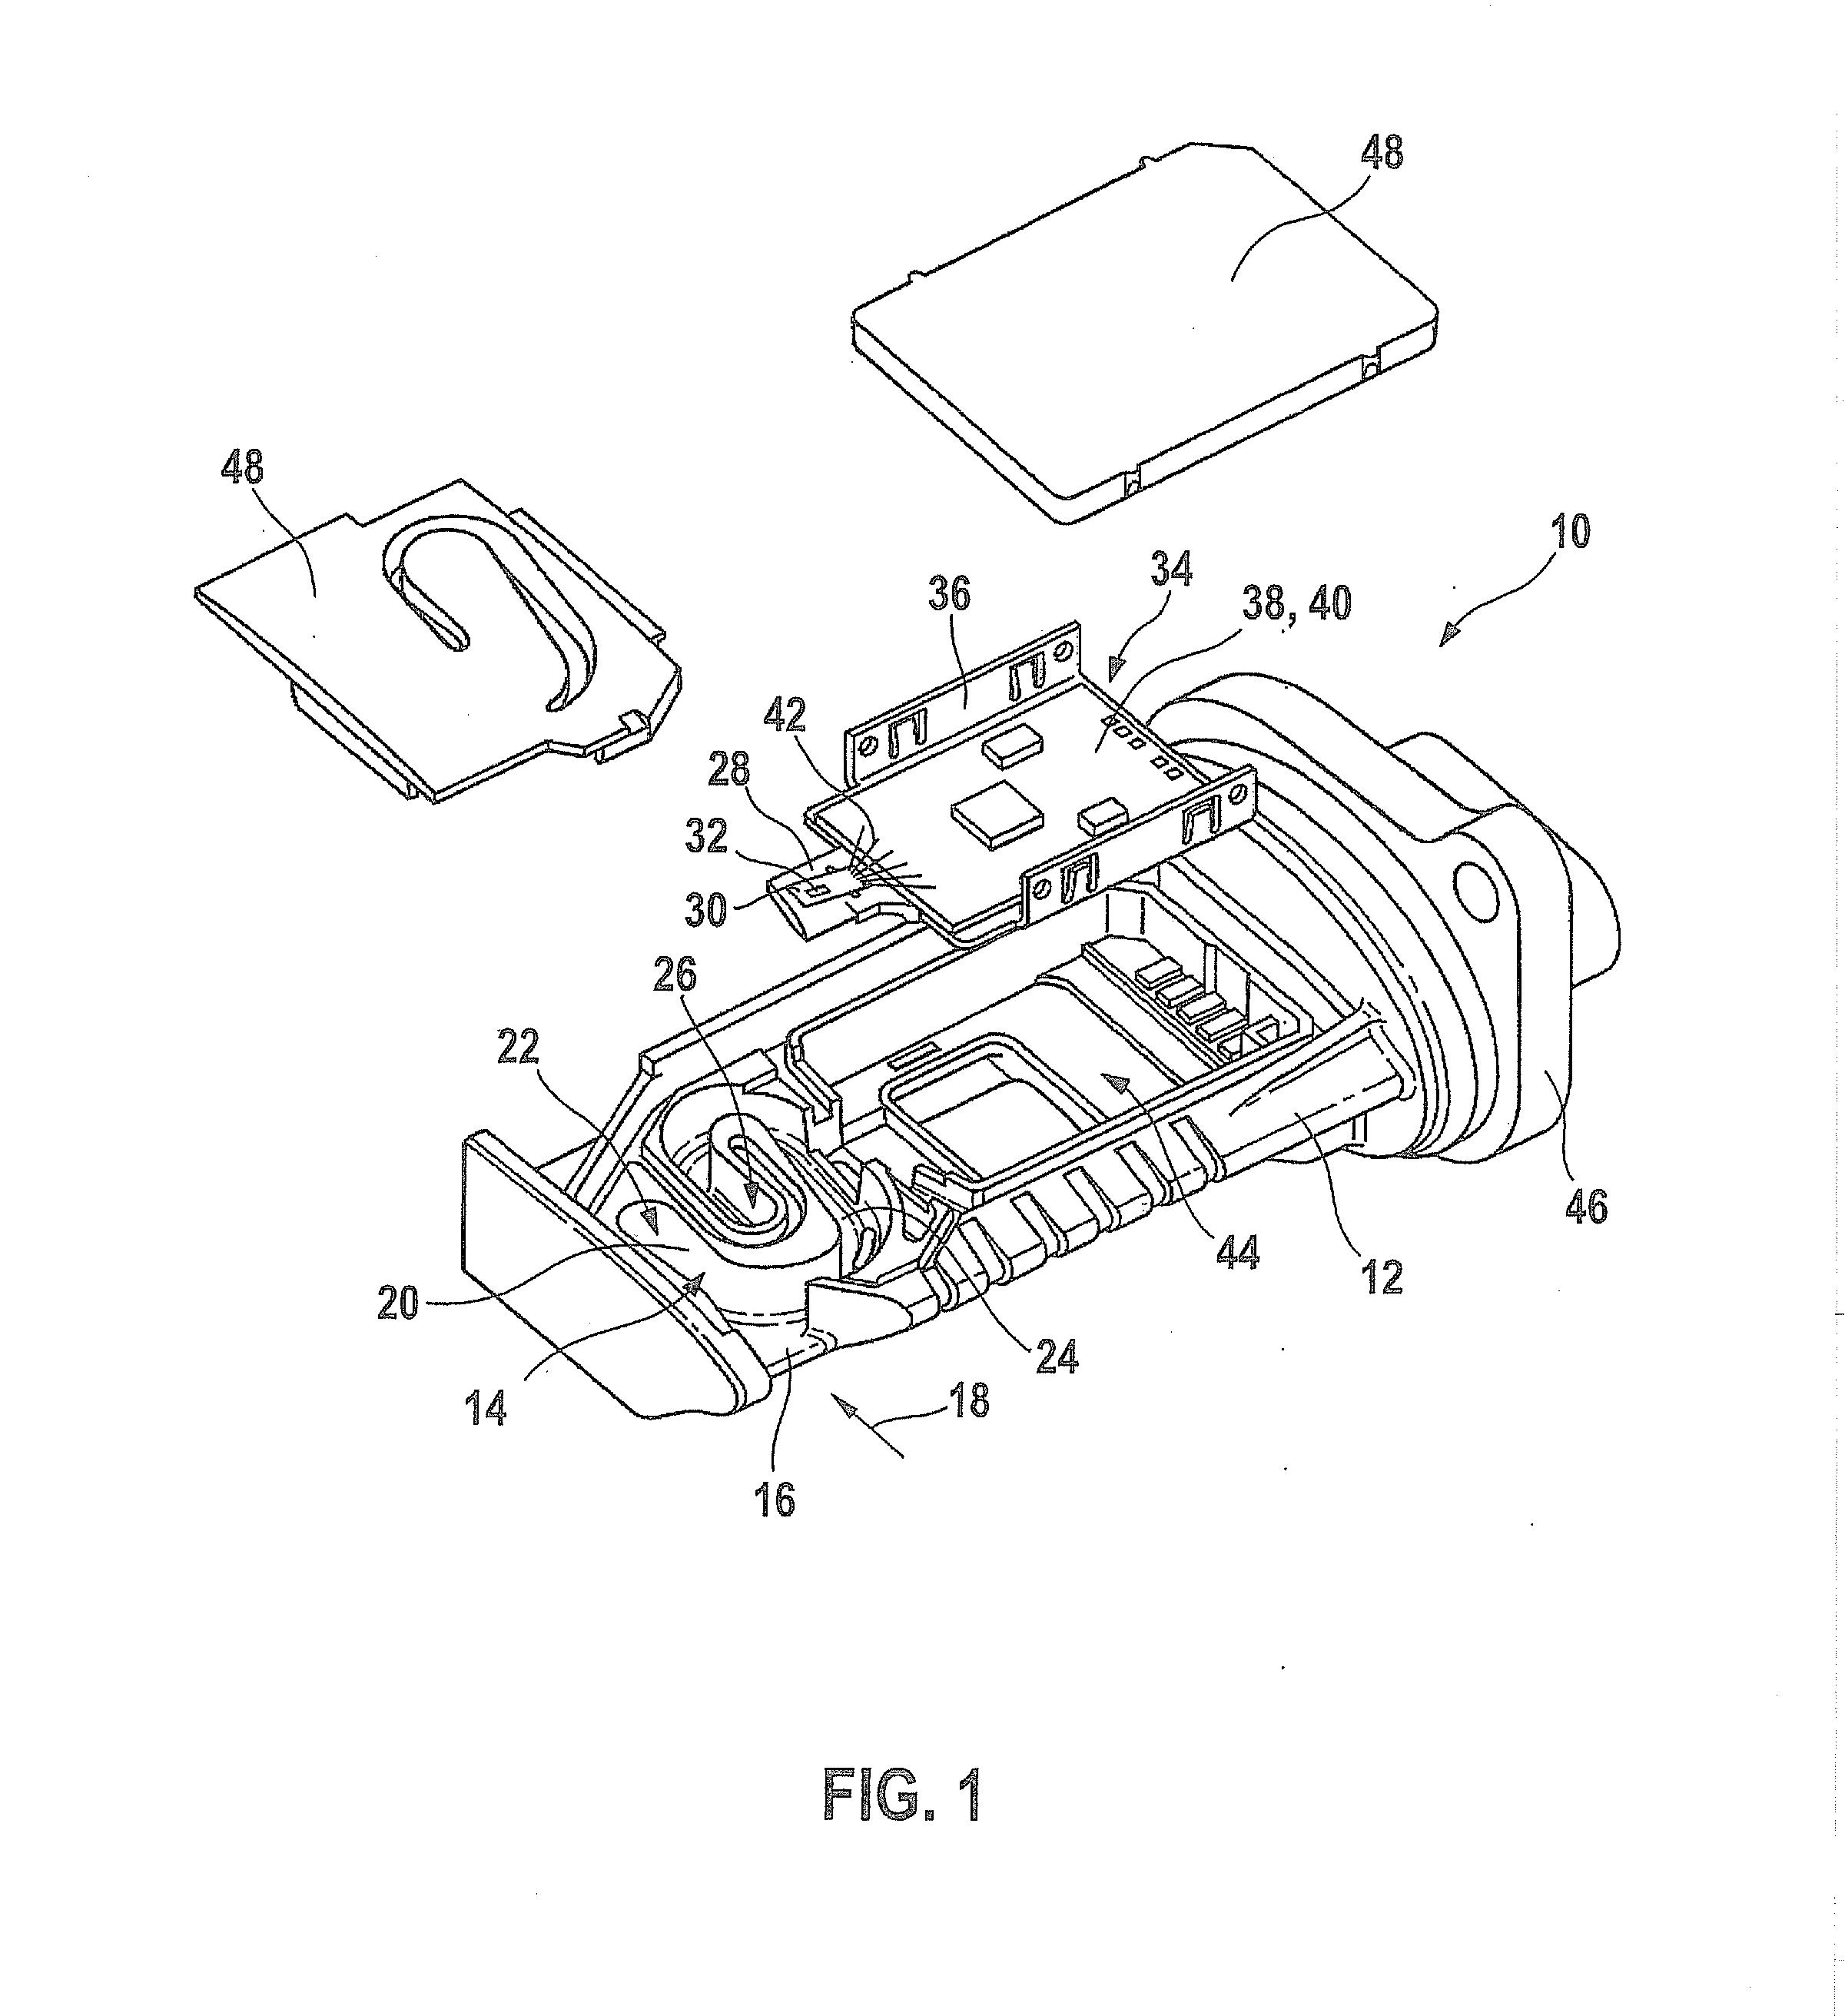 Sensor system for determining at least one flow property of a fluid medium flowing in a main flow direction